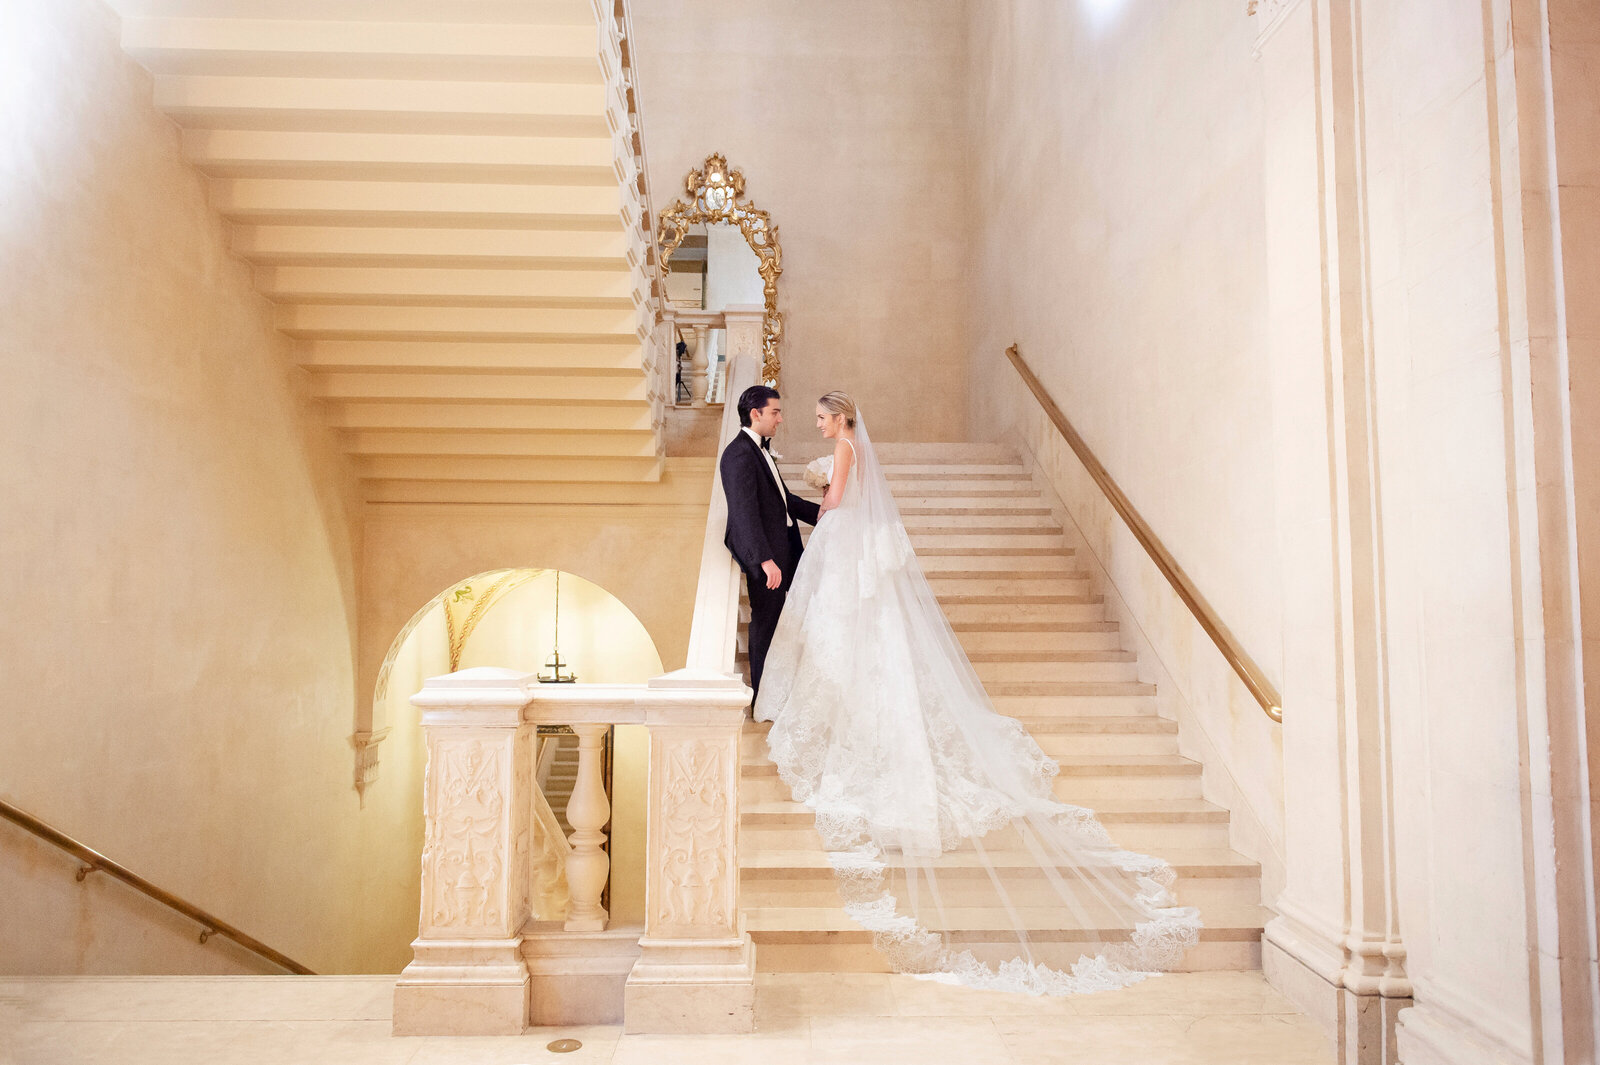 Bride and groom standing on marble staircase